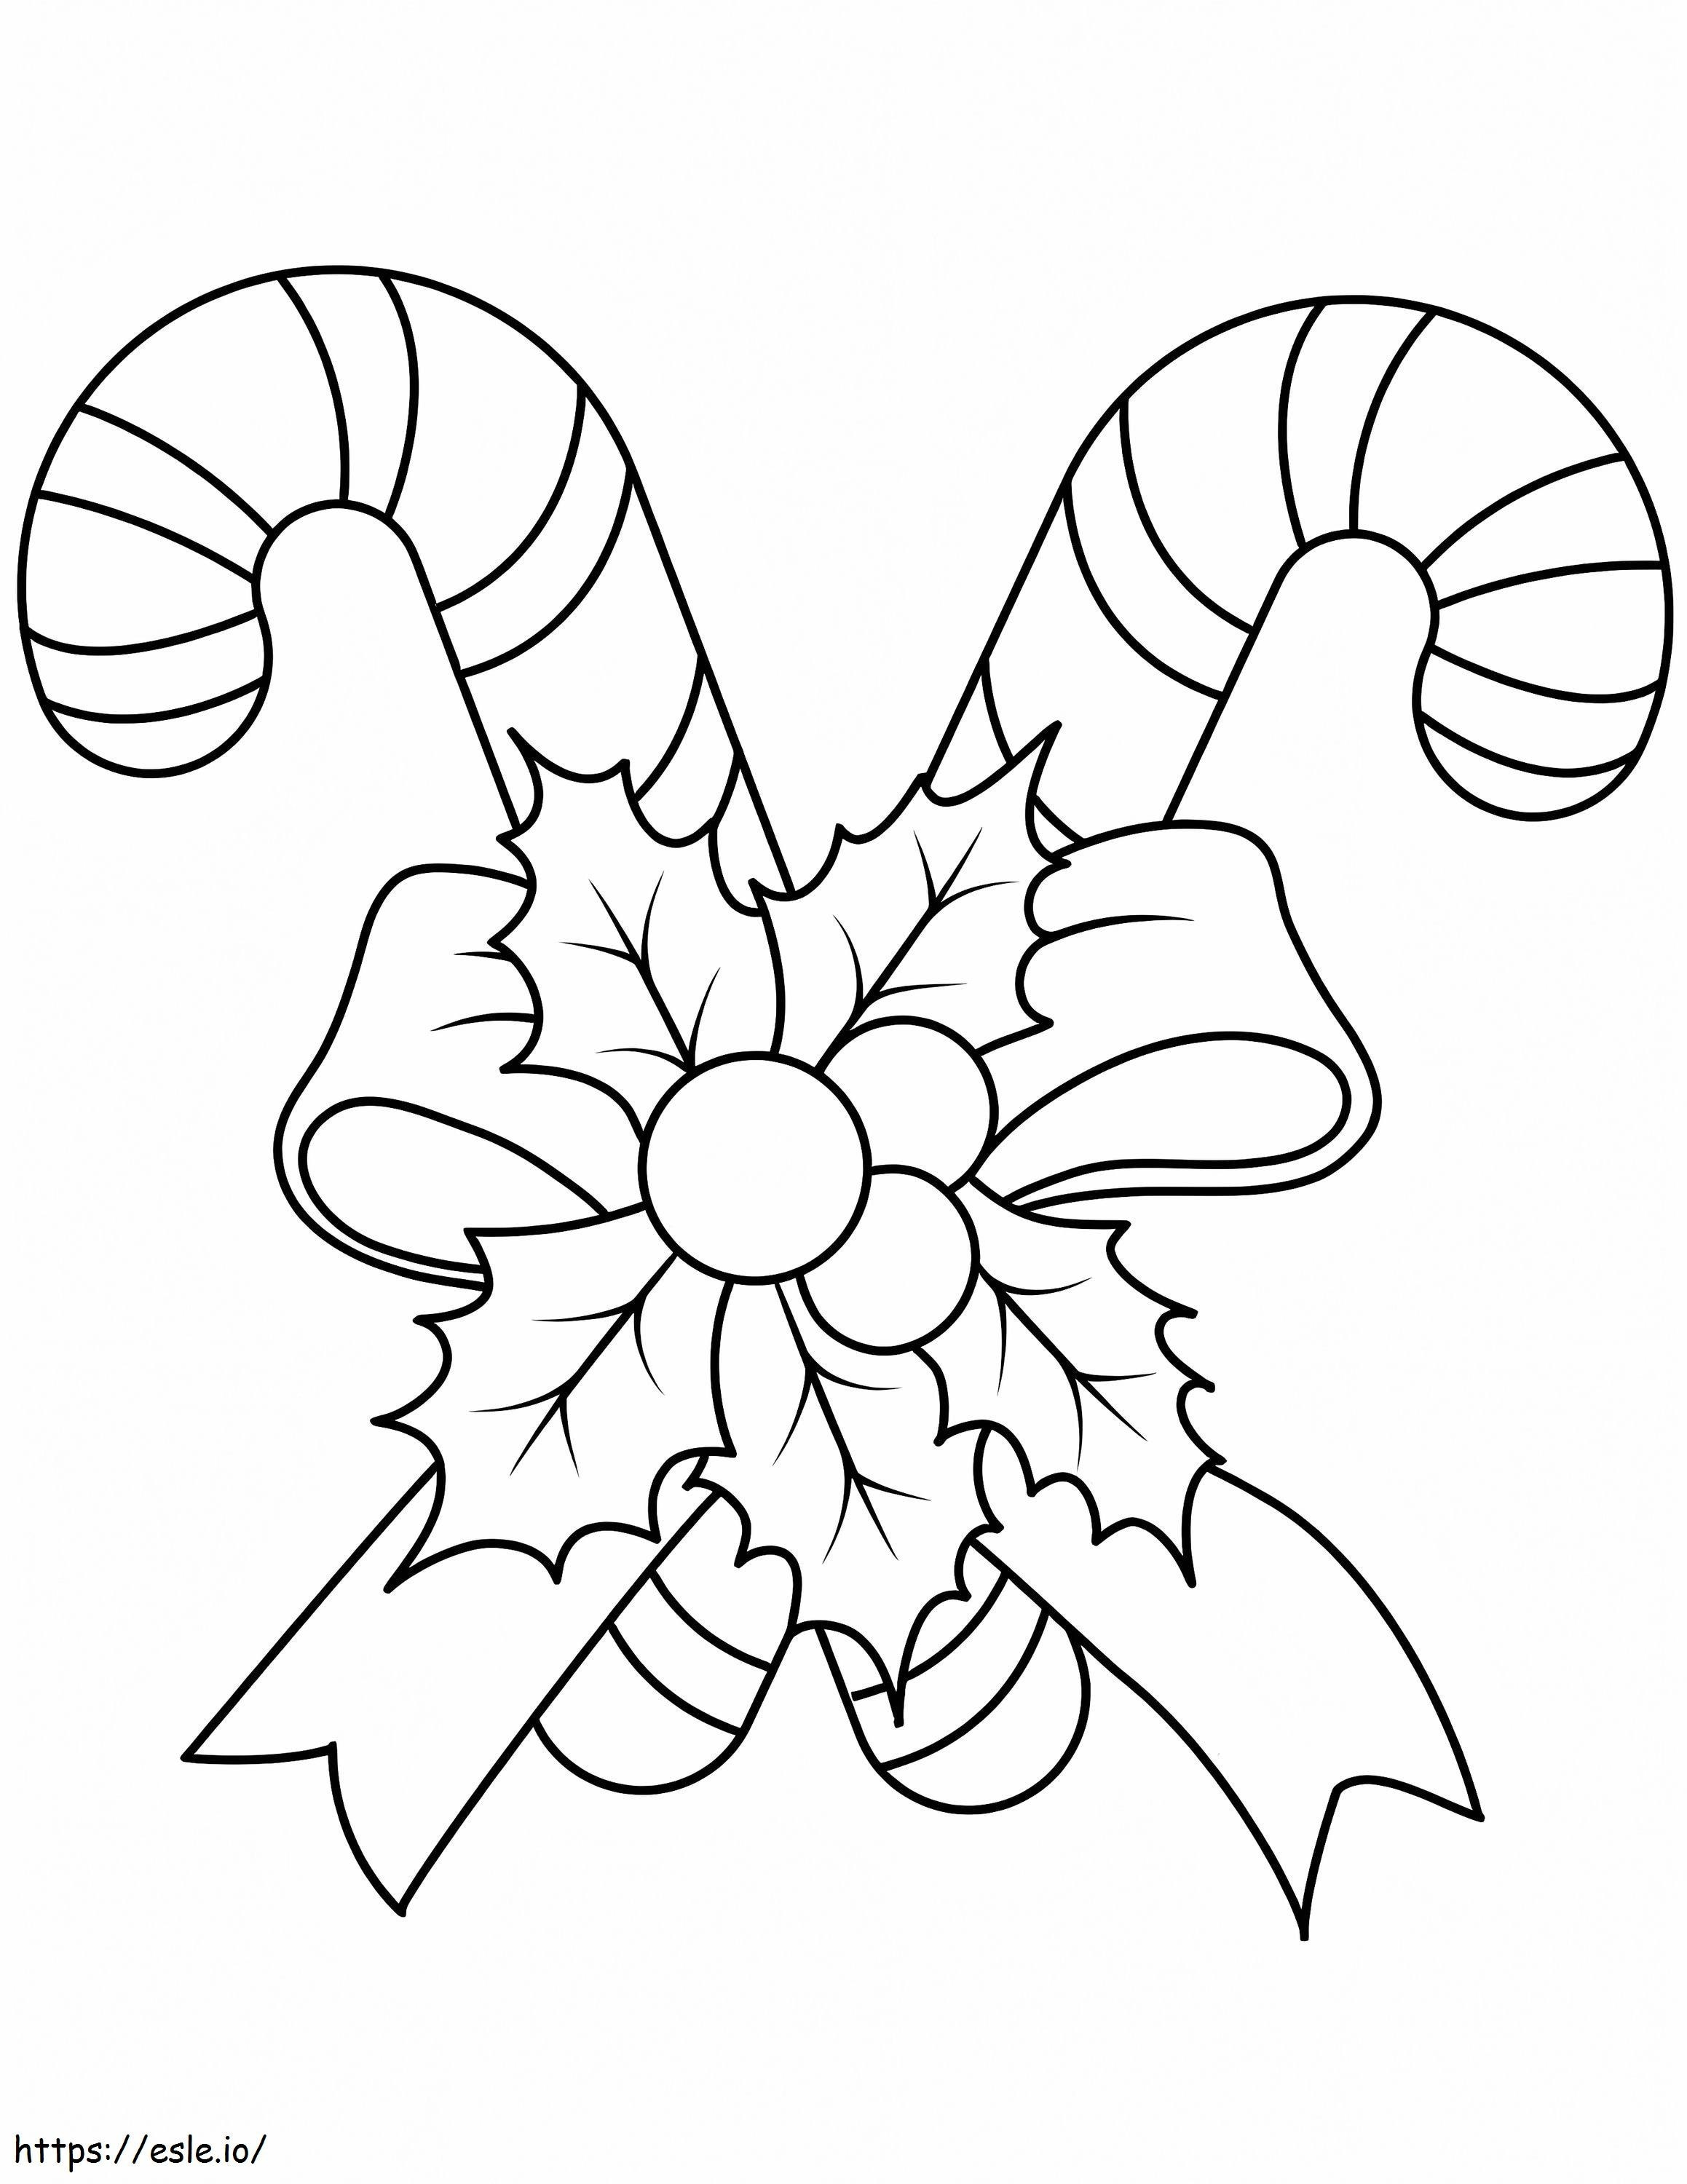 Christmas Candy Canes coloring page